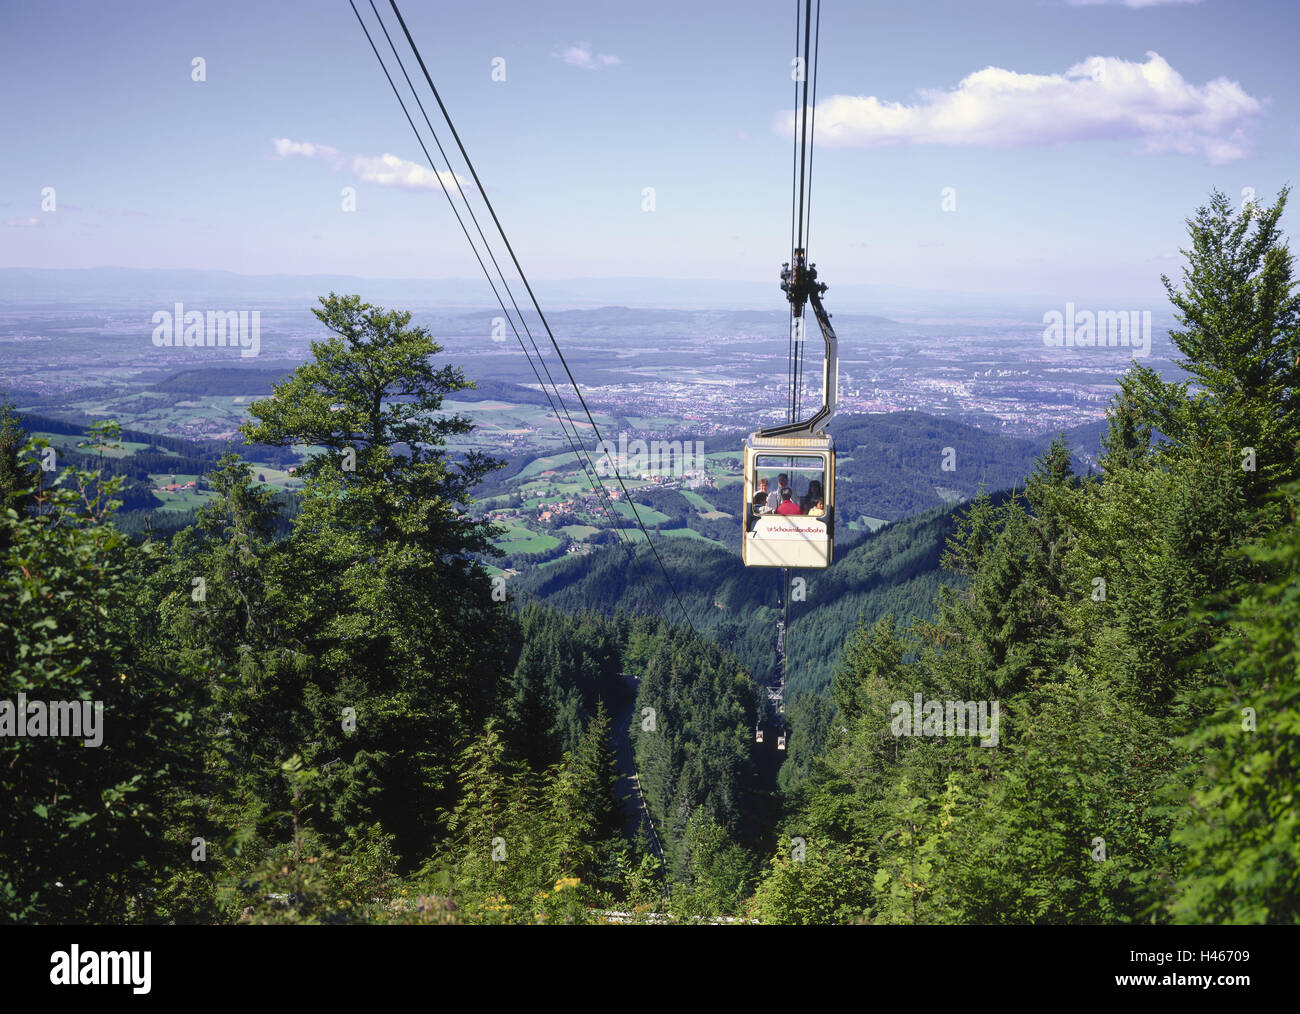 Germany, Baden-Wurttemberg, Schauinsland, cable car, view, Freiburg, Black Forest, south Black Forest, Breisgau, scenery, mountain, wood, mountain railway, gondolas, tourists, tourism, person, promotion, transport, personal transport, width, distance, Stock Photo